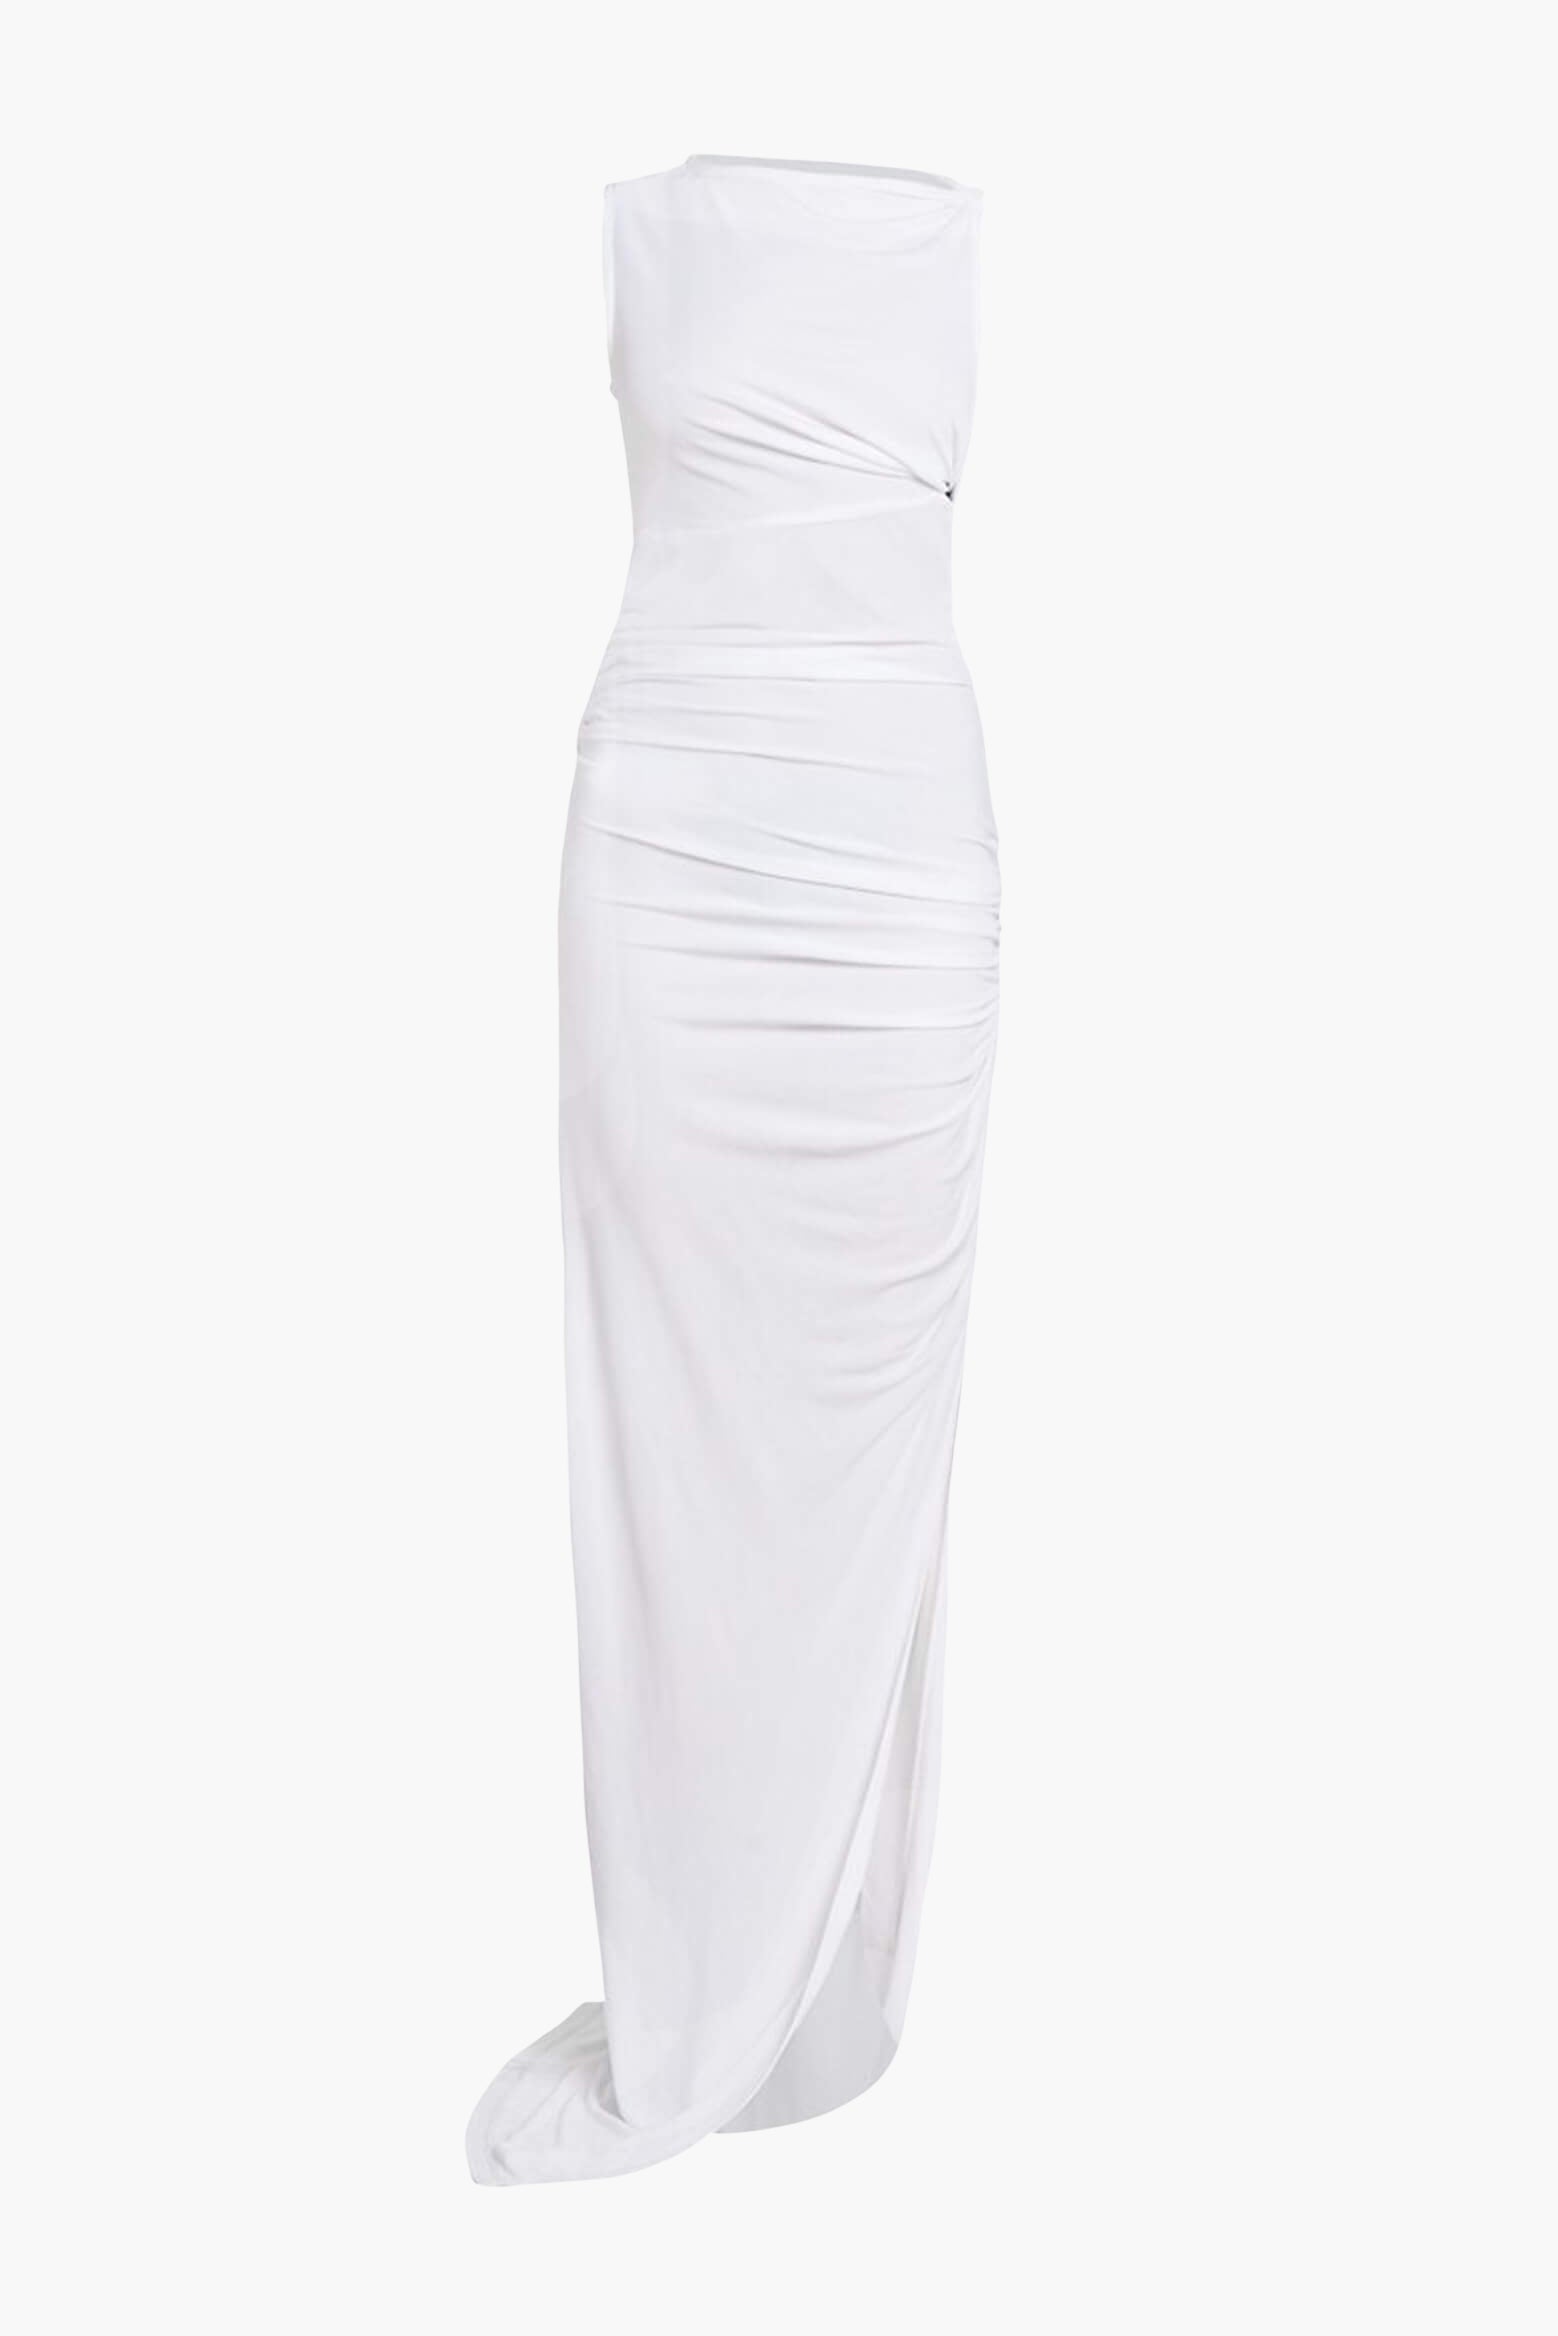 Christopher Esber Gesine Twisted Column Dress in White available at The New Trend